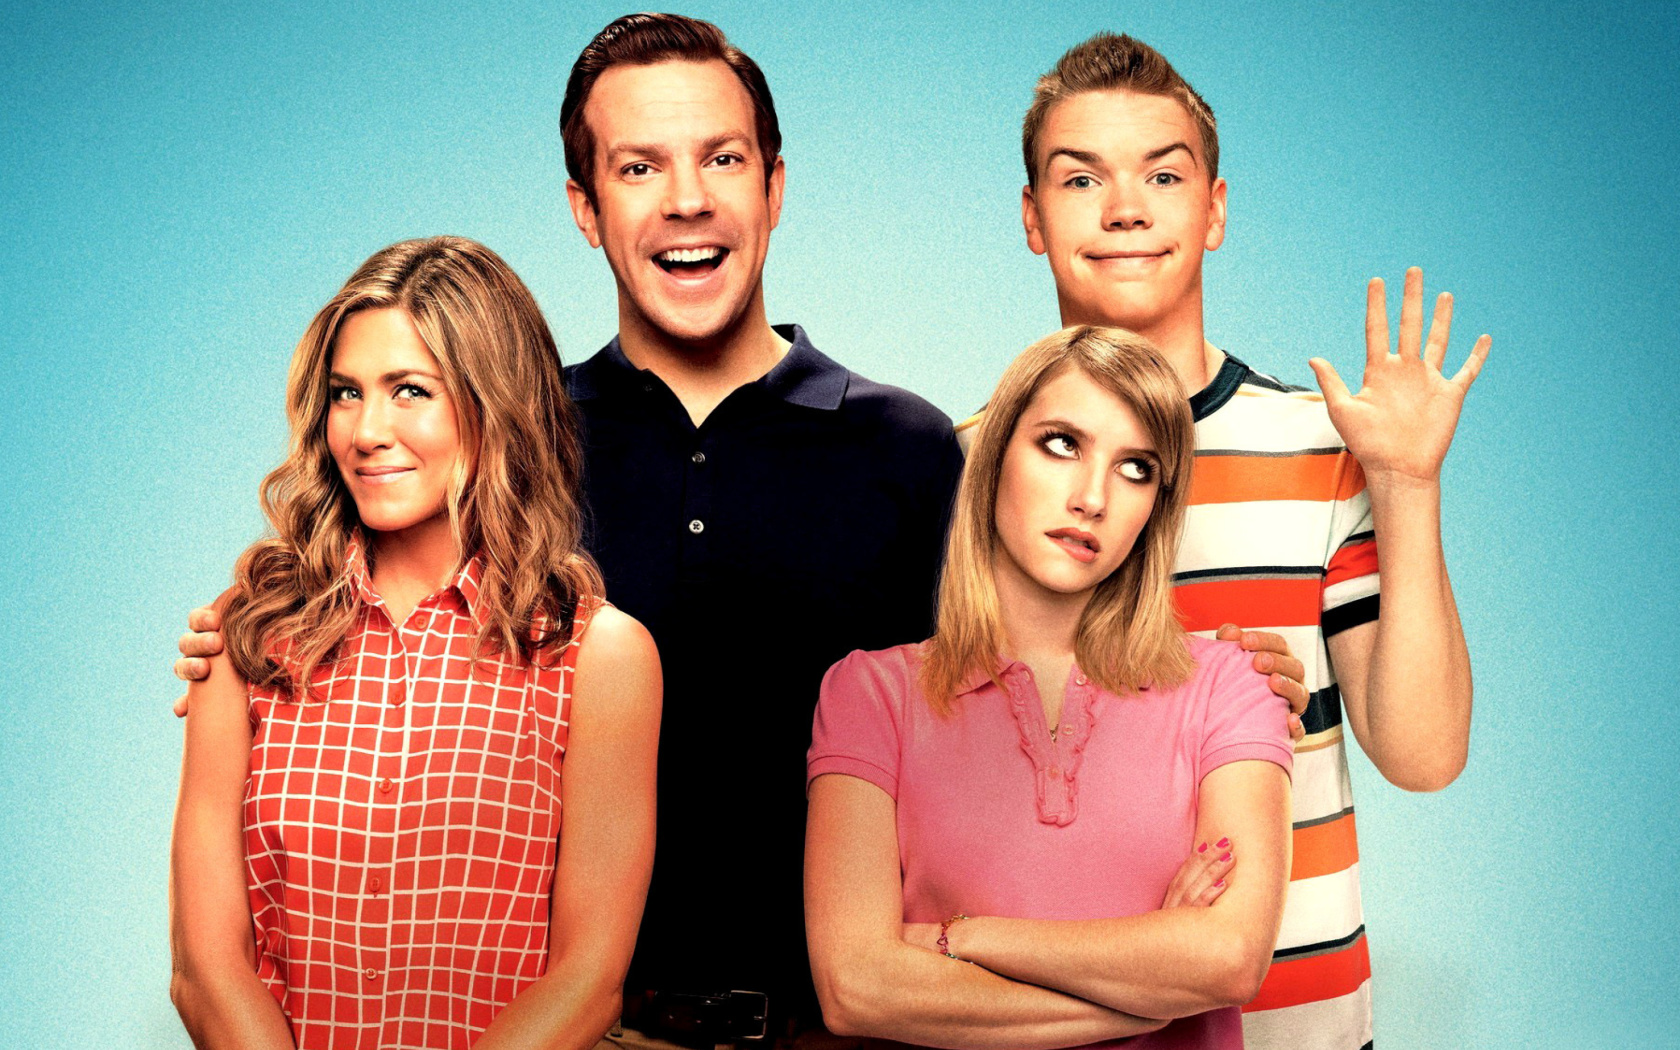 We are the Millers wallpaper 1680x1050